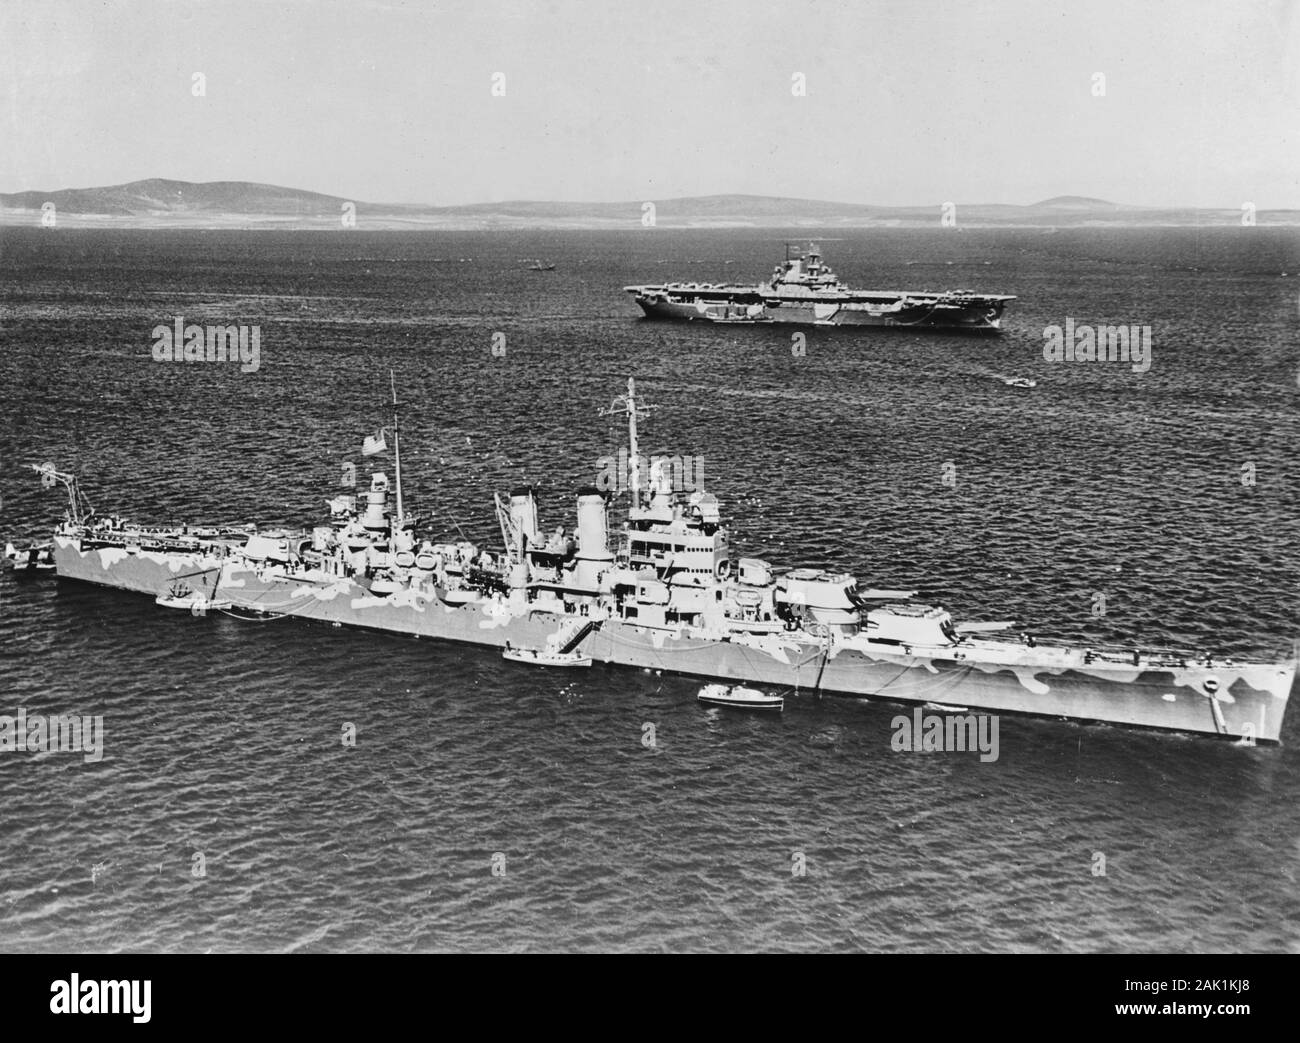 The U.S. Navy heavy cruiser USS Wichita (CA-45) at anchor in Scapa Flow, Scotland (UK), in April 1942. The aircraft carrier USS Wasp (CV-7) is in the background. Stock Photo